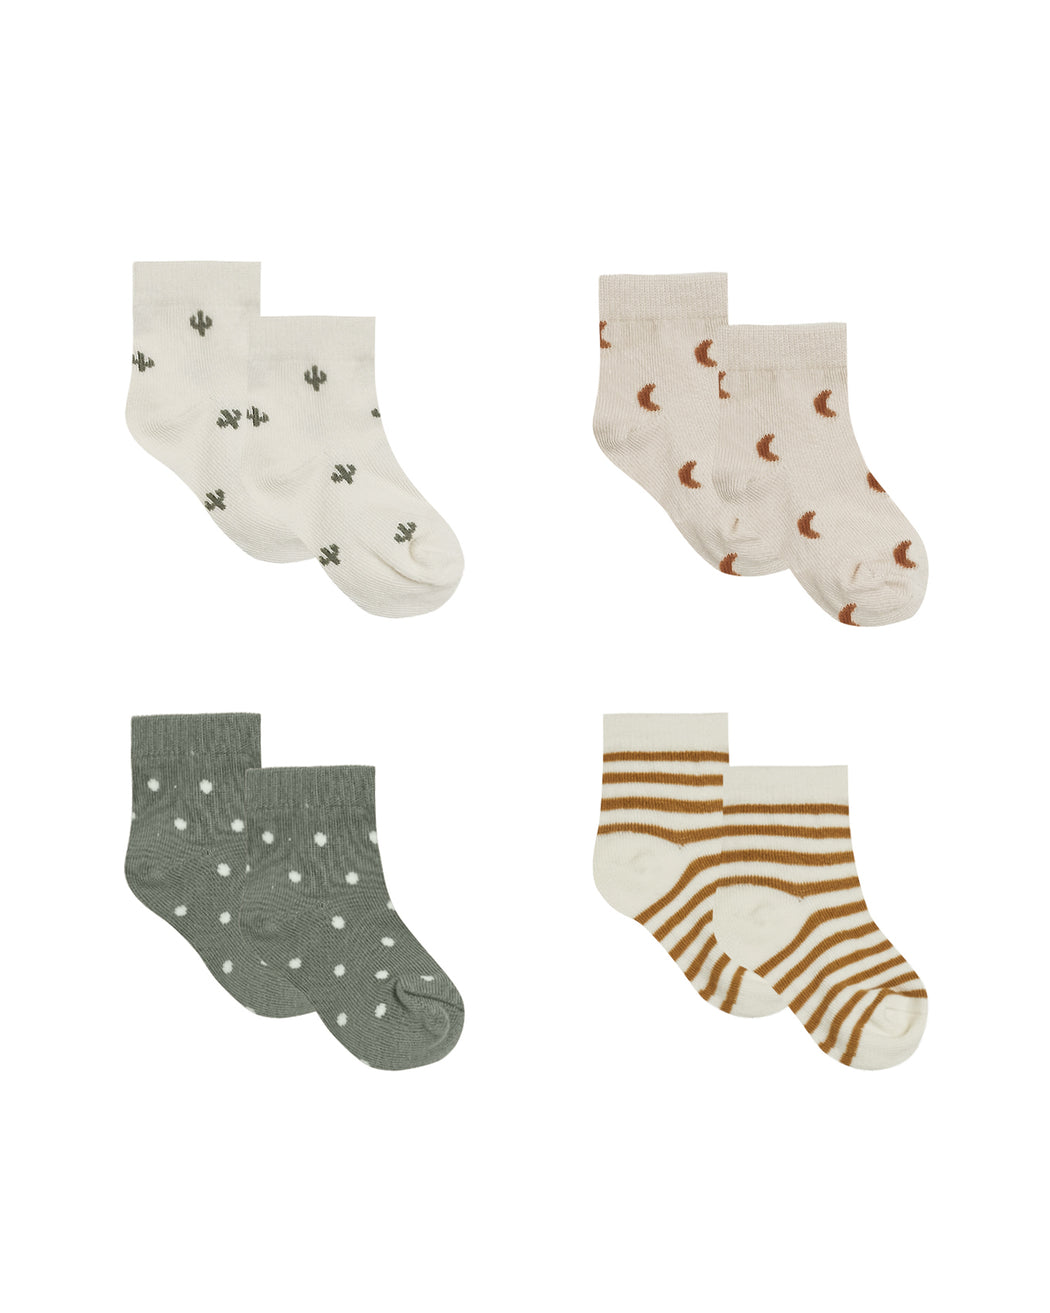 Printed Sock Set – Assorted Sets of Four